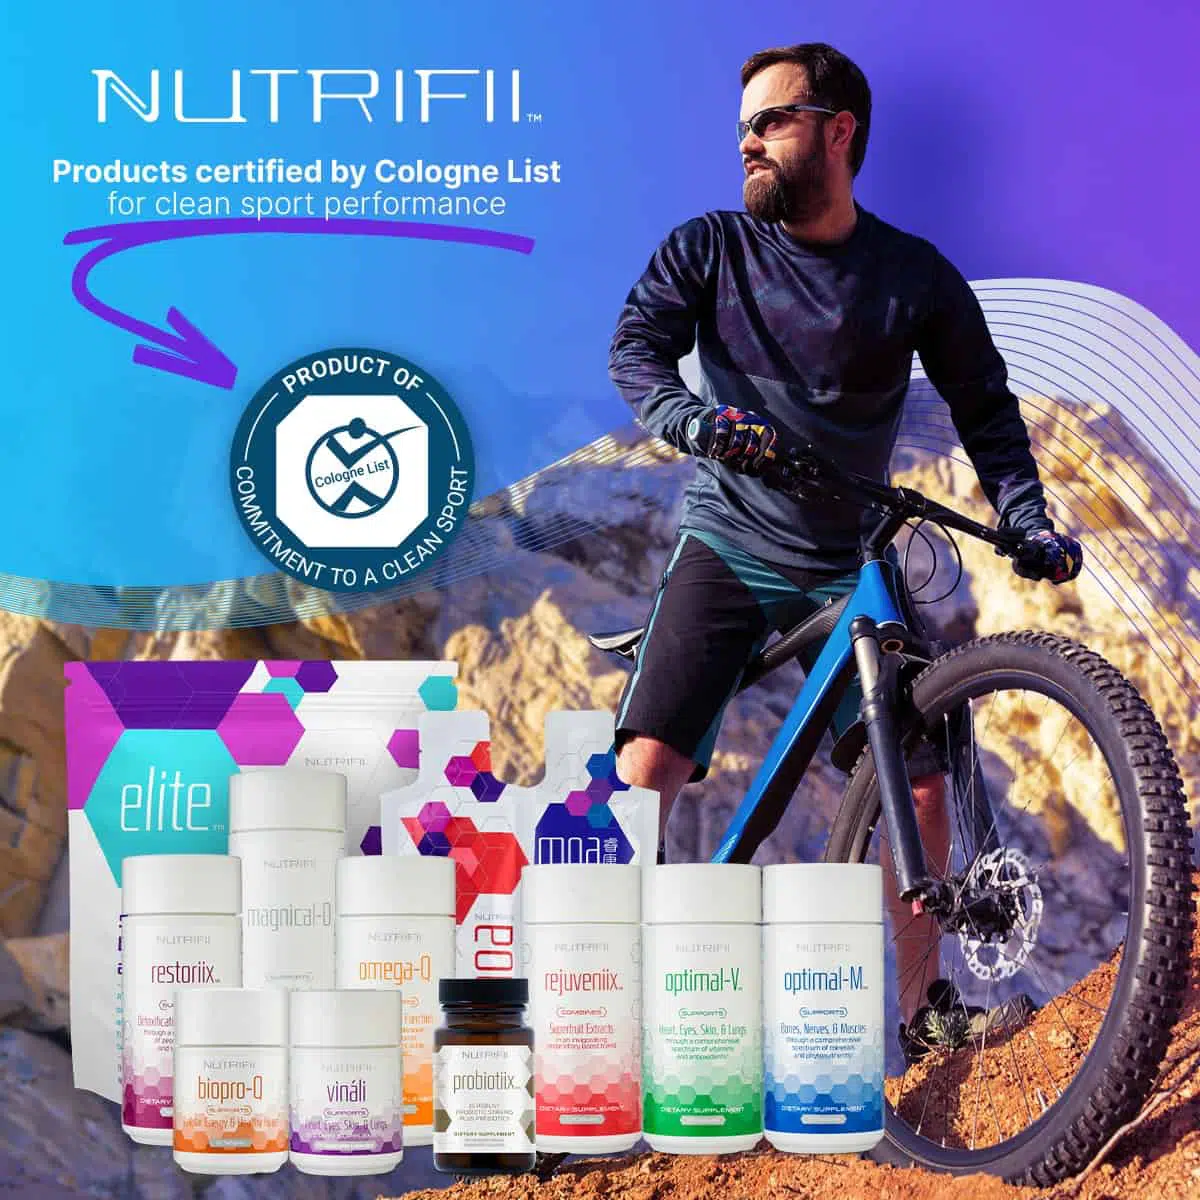 Nutrifii Products Certified by Cologne List